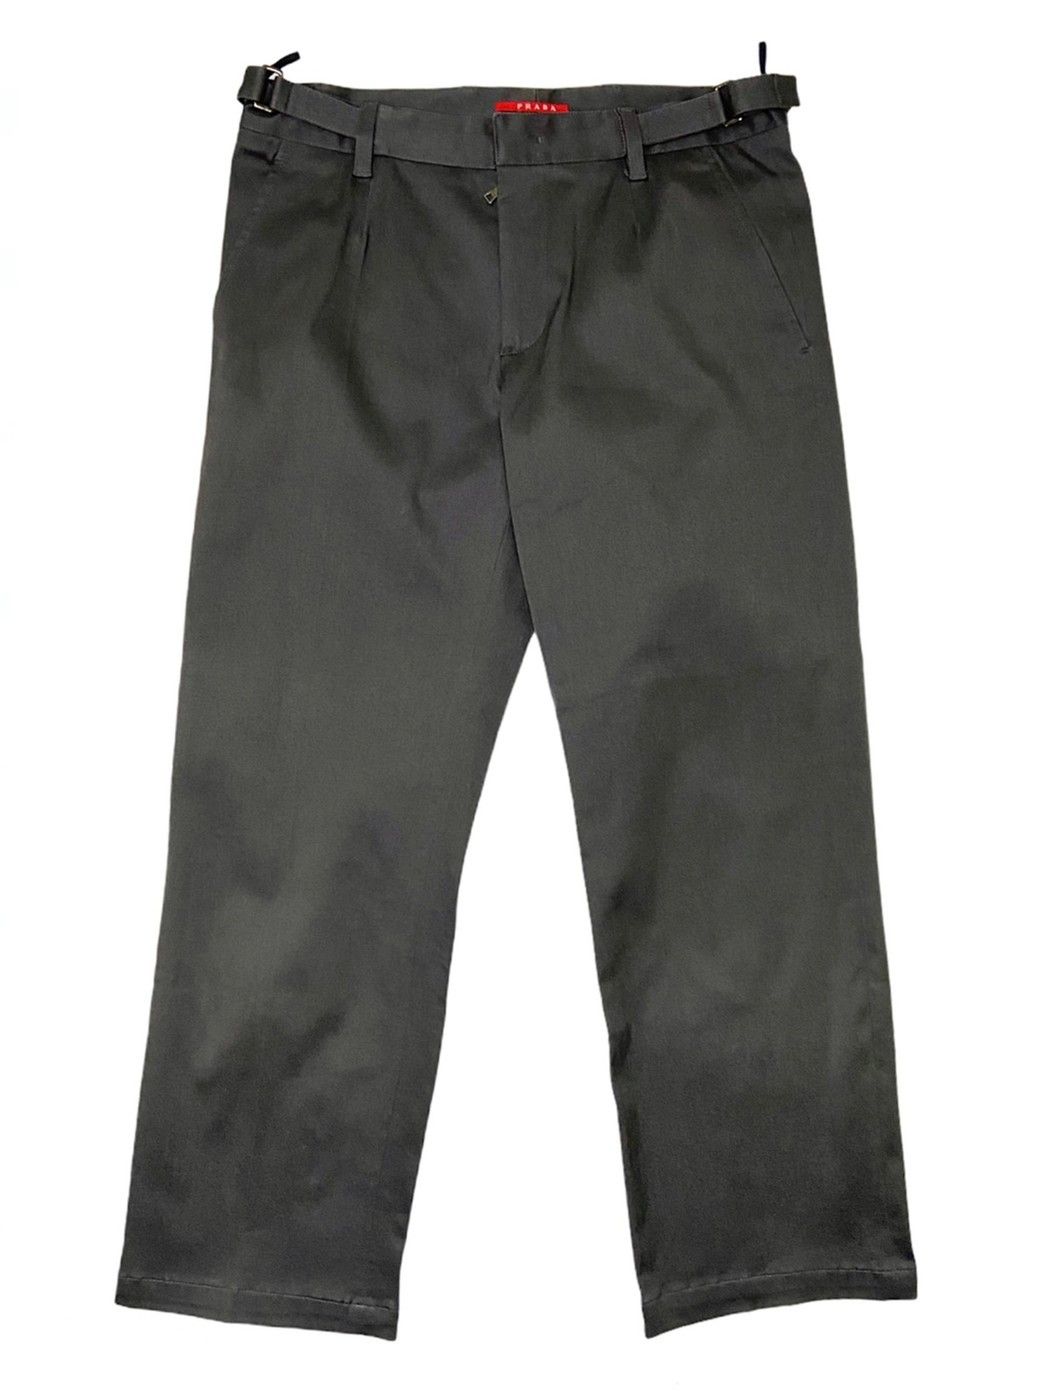 Prada MINIMALISTIC SS’08 RELAXED FIT GREY VELCRO CHINOS PANTS | Grailed